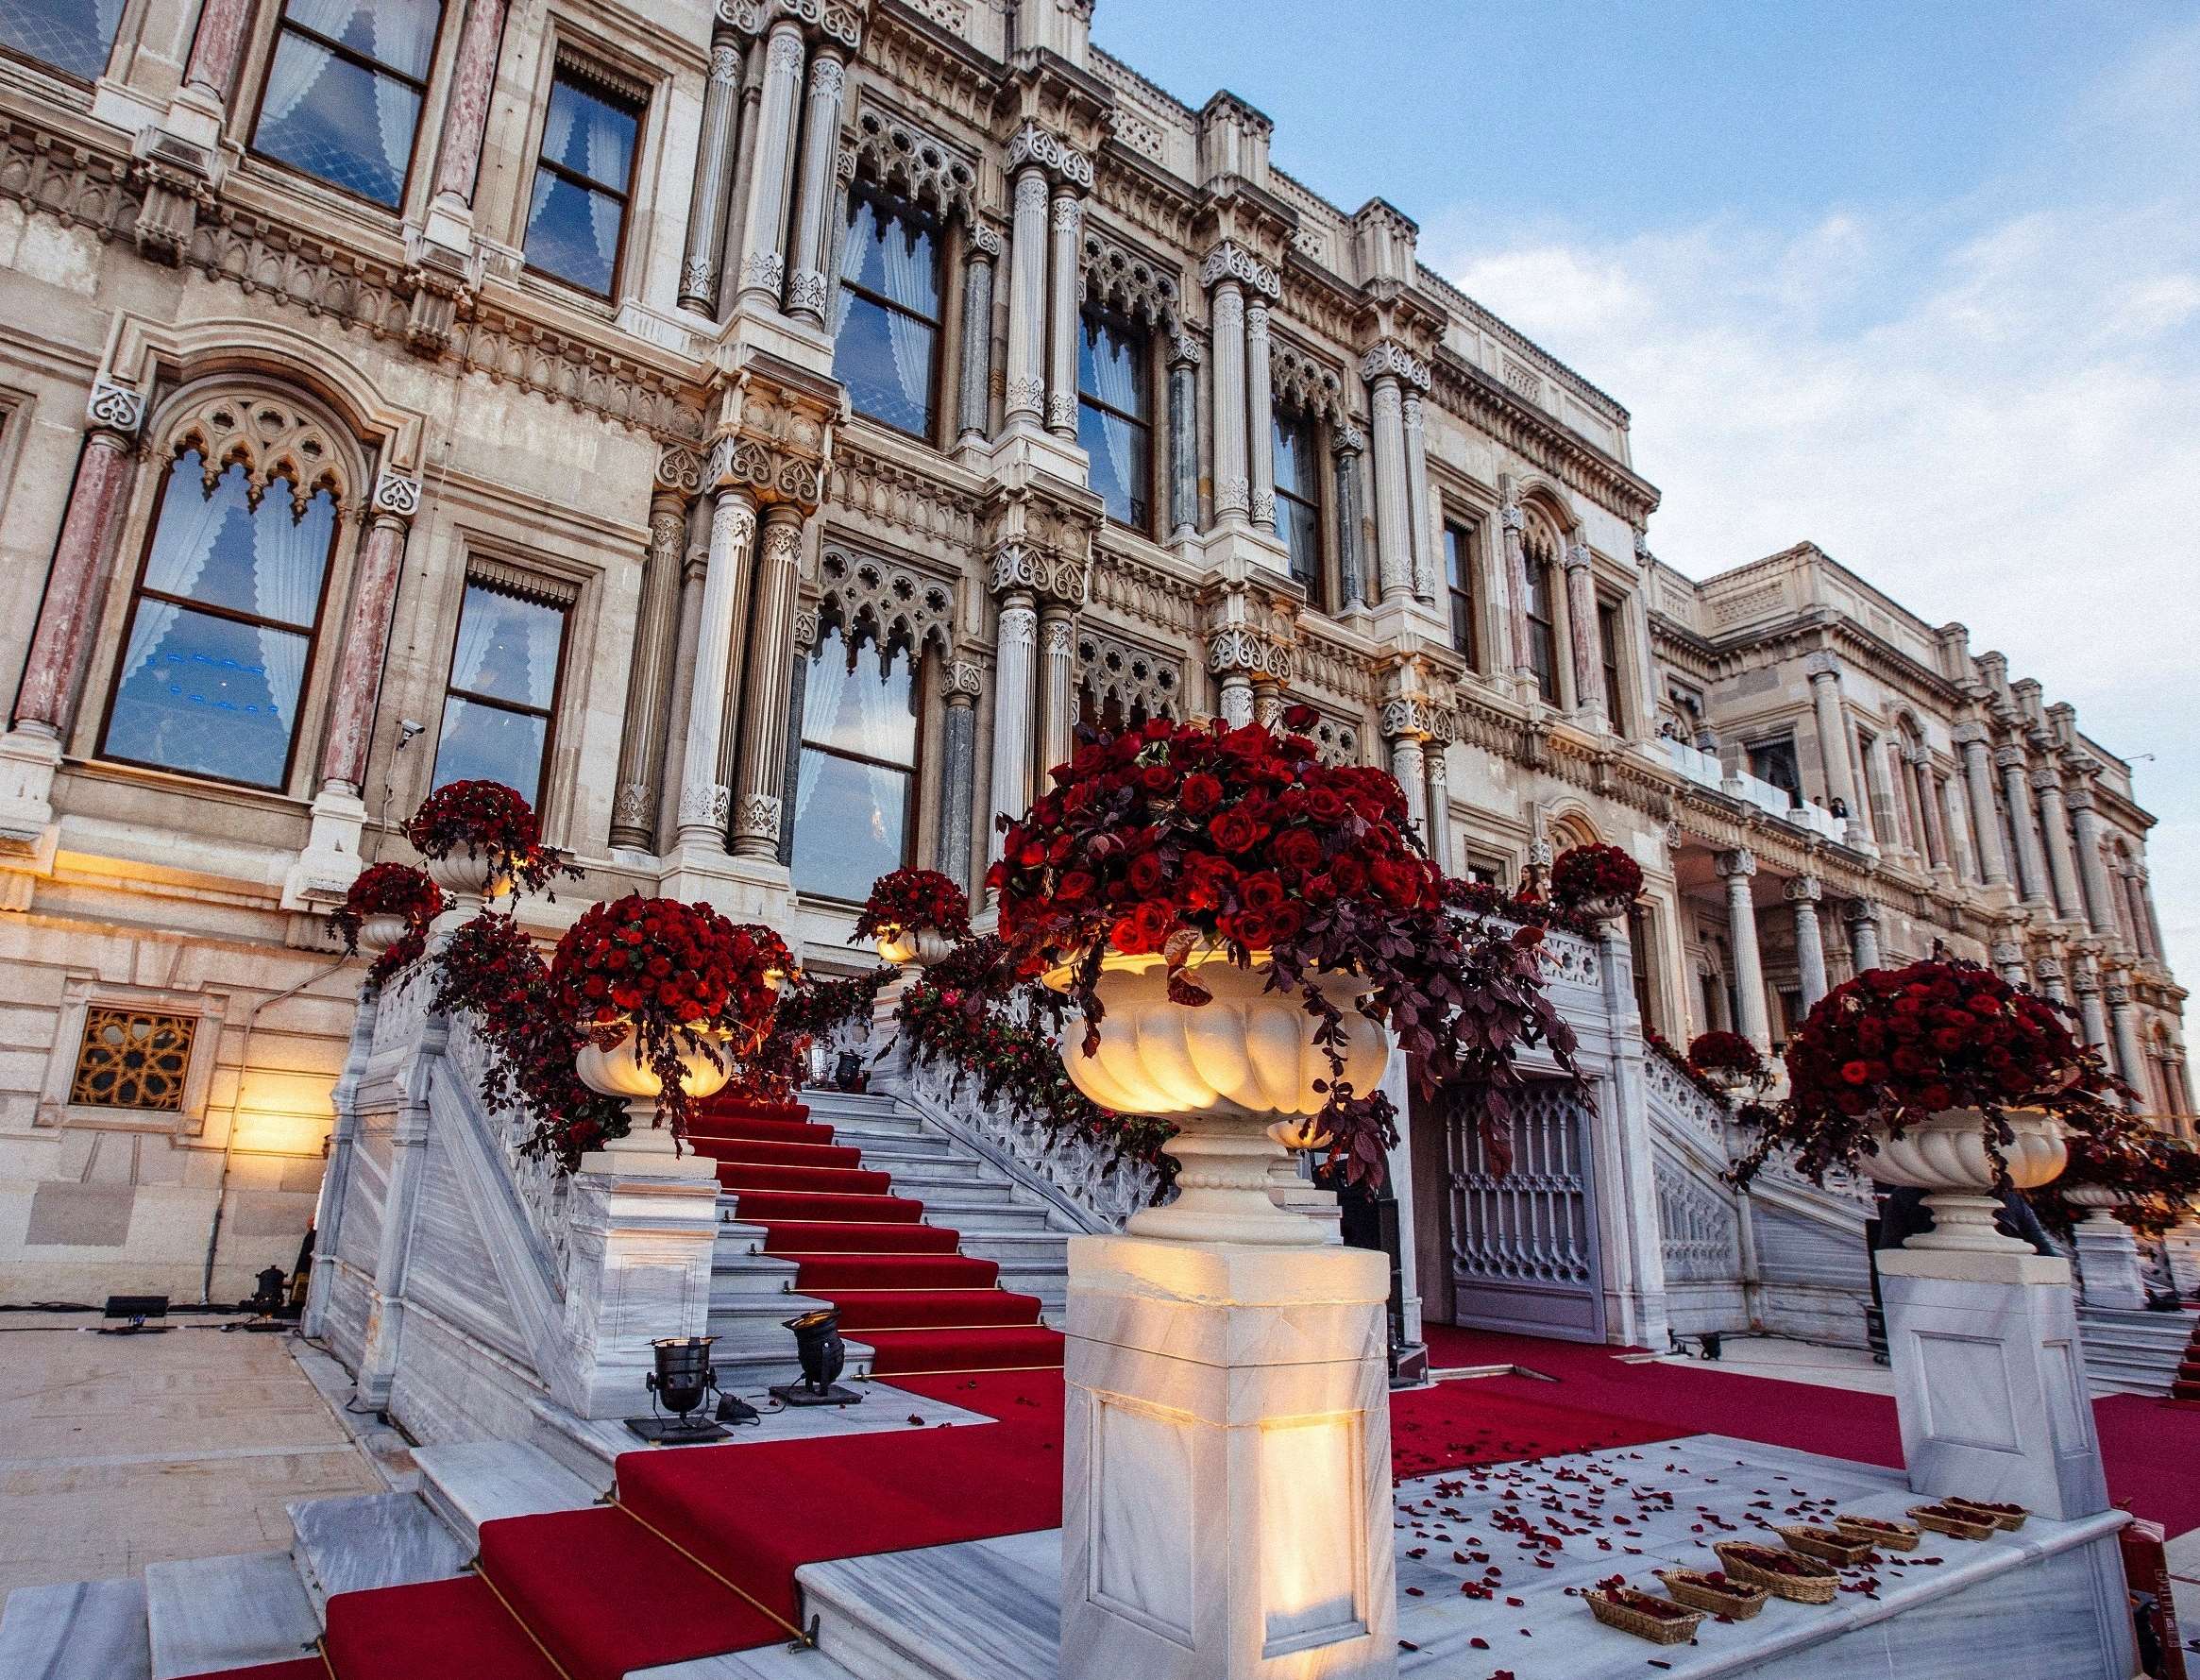 Ciragan Palace decorated in red for a wedding | Wedifys